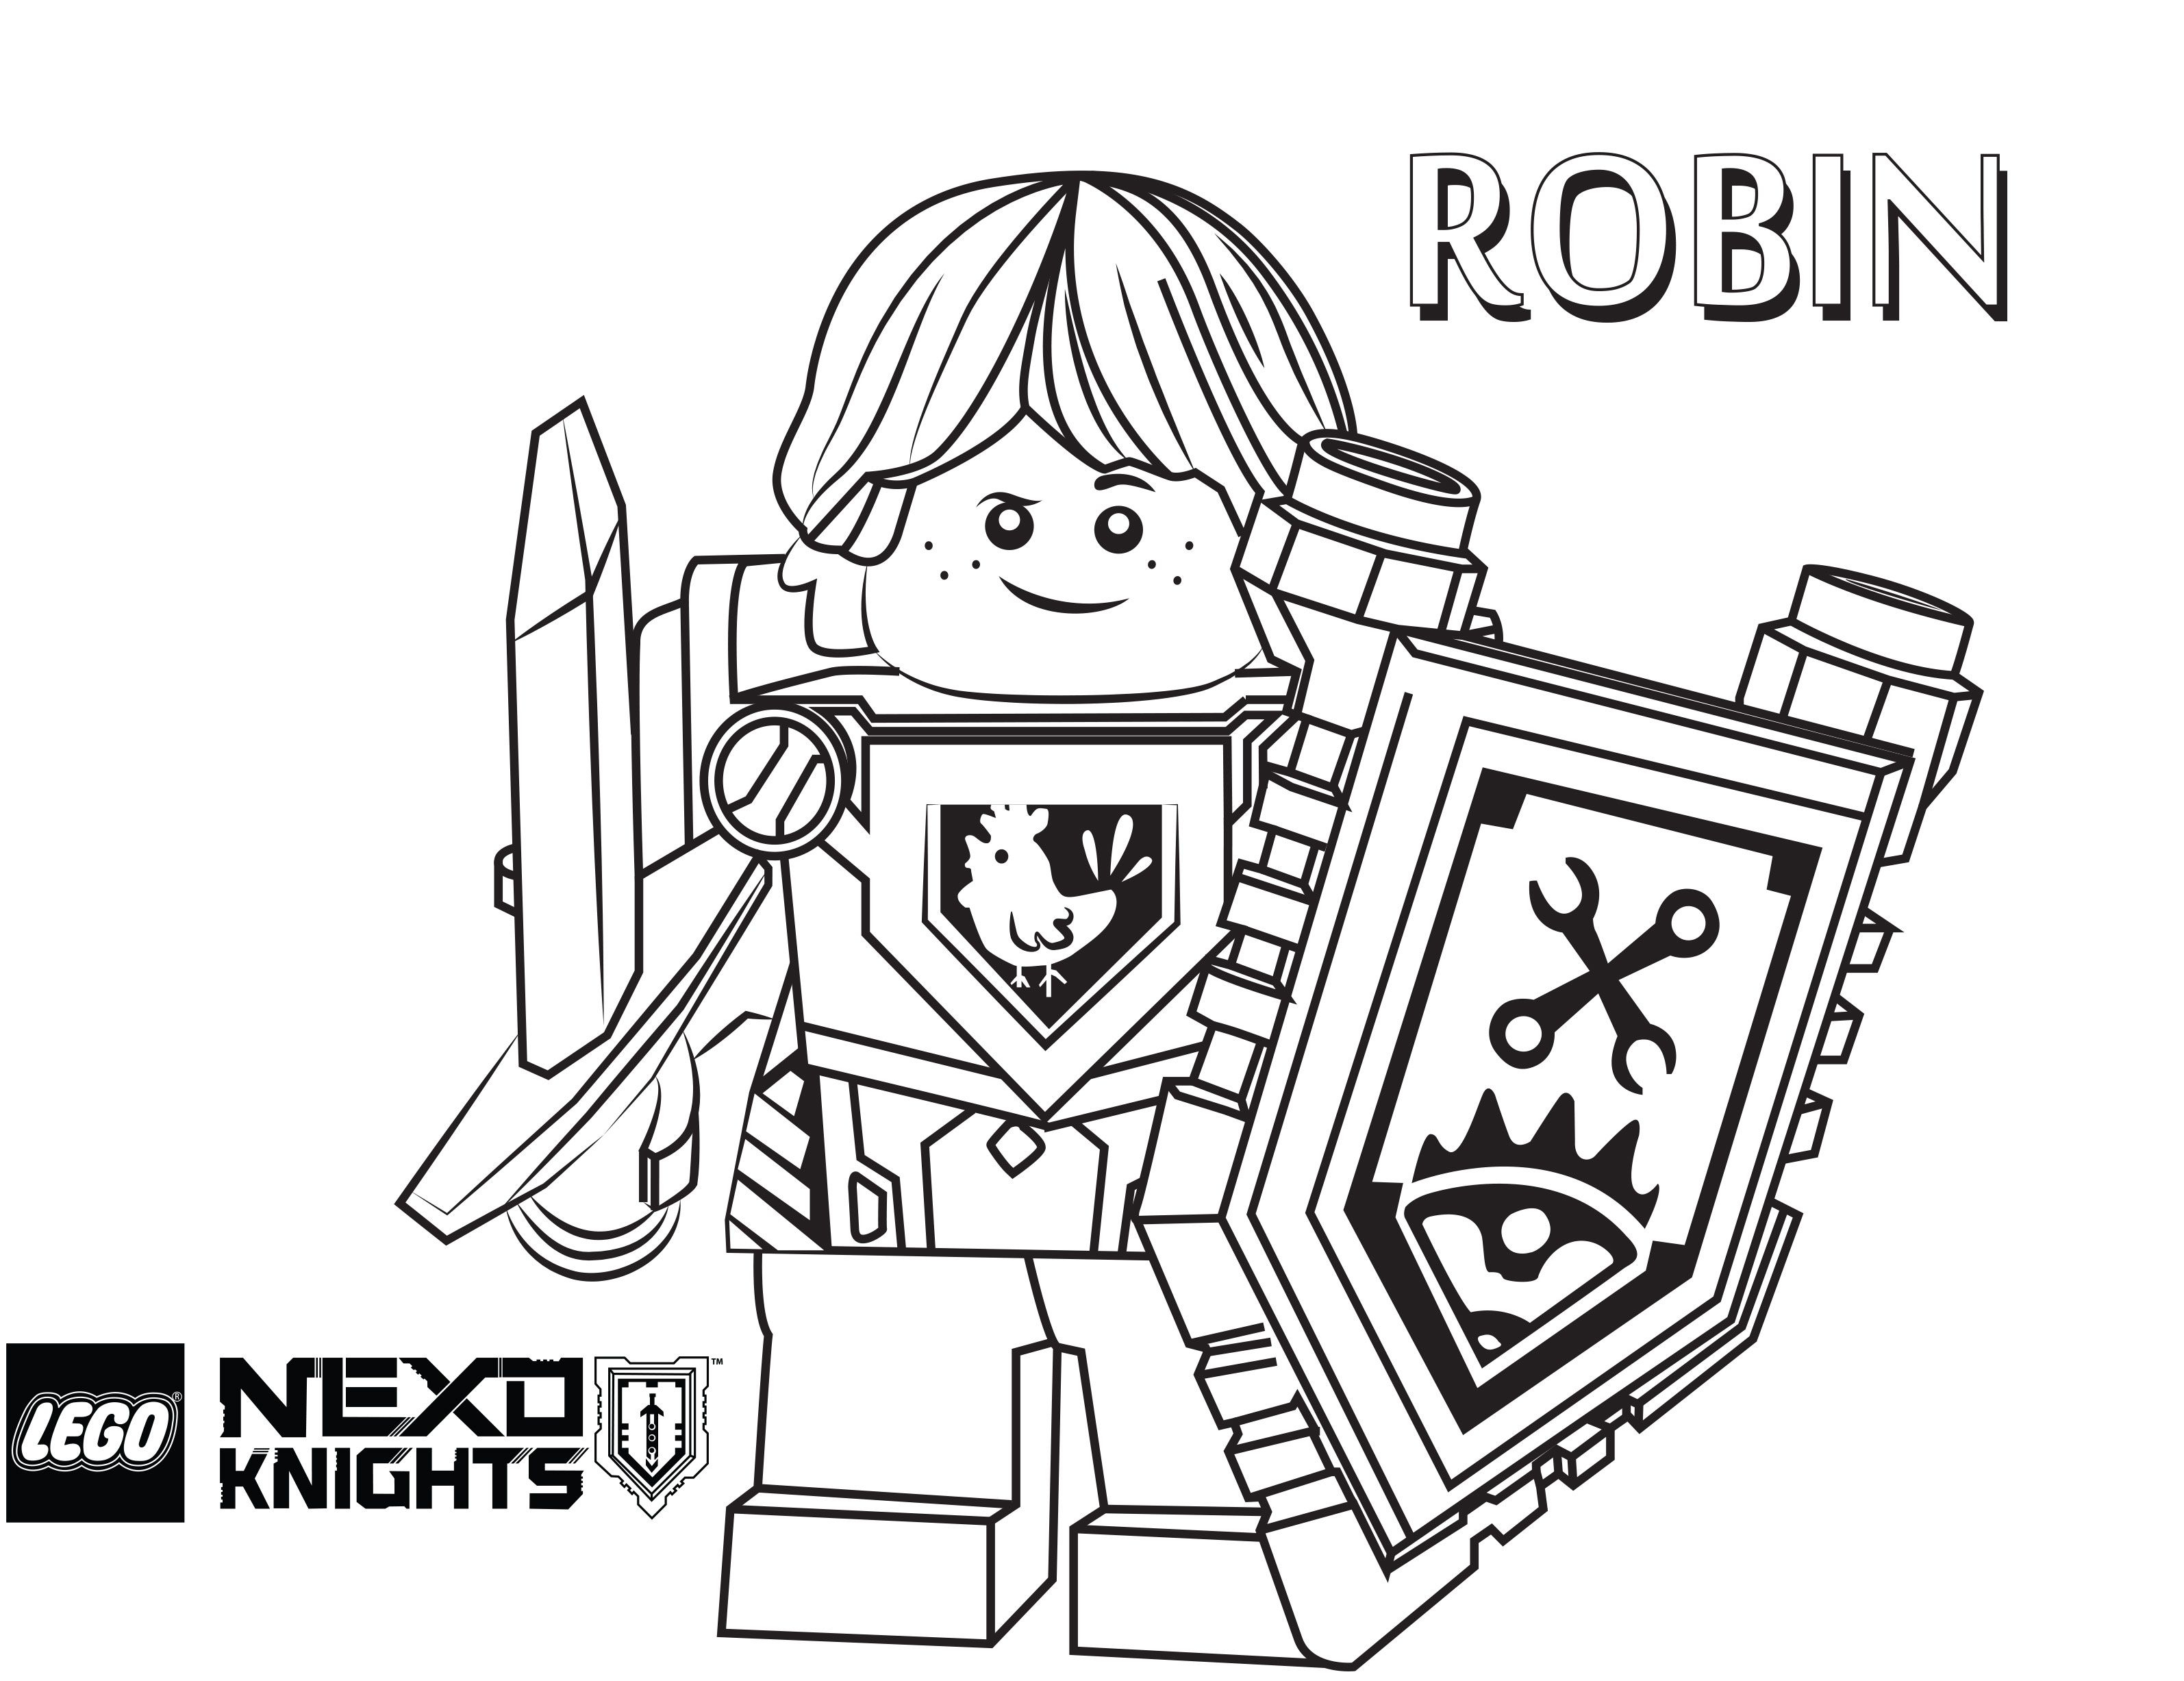 Coloring Pages : Coloring Pageso Nexo Knights Free Printable For - Free Printable Pictures Of Knights